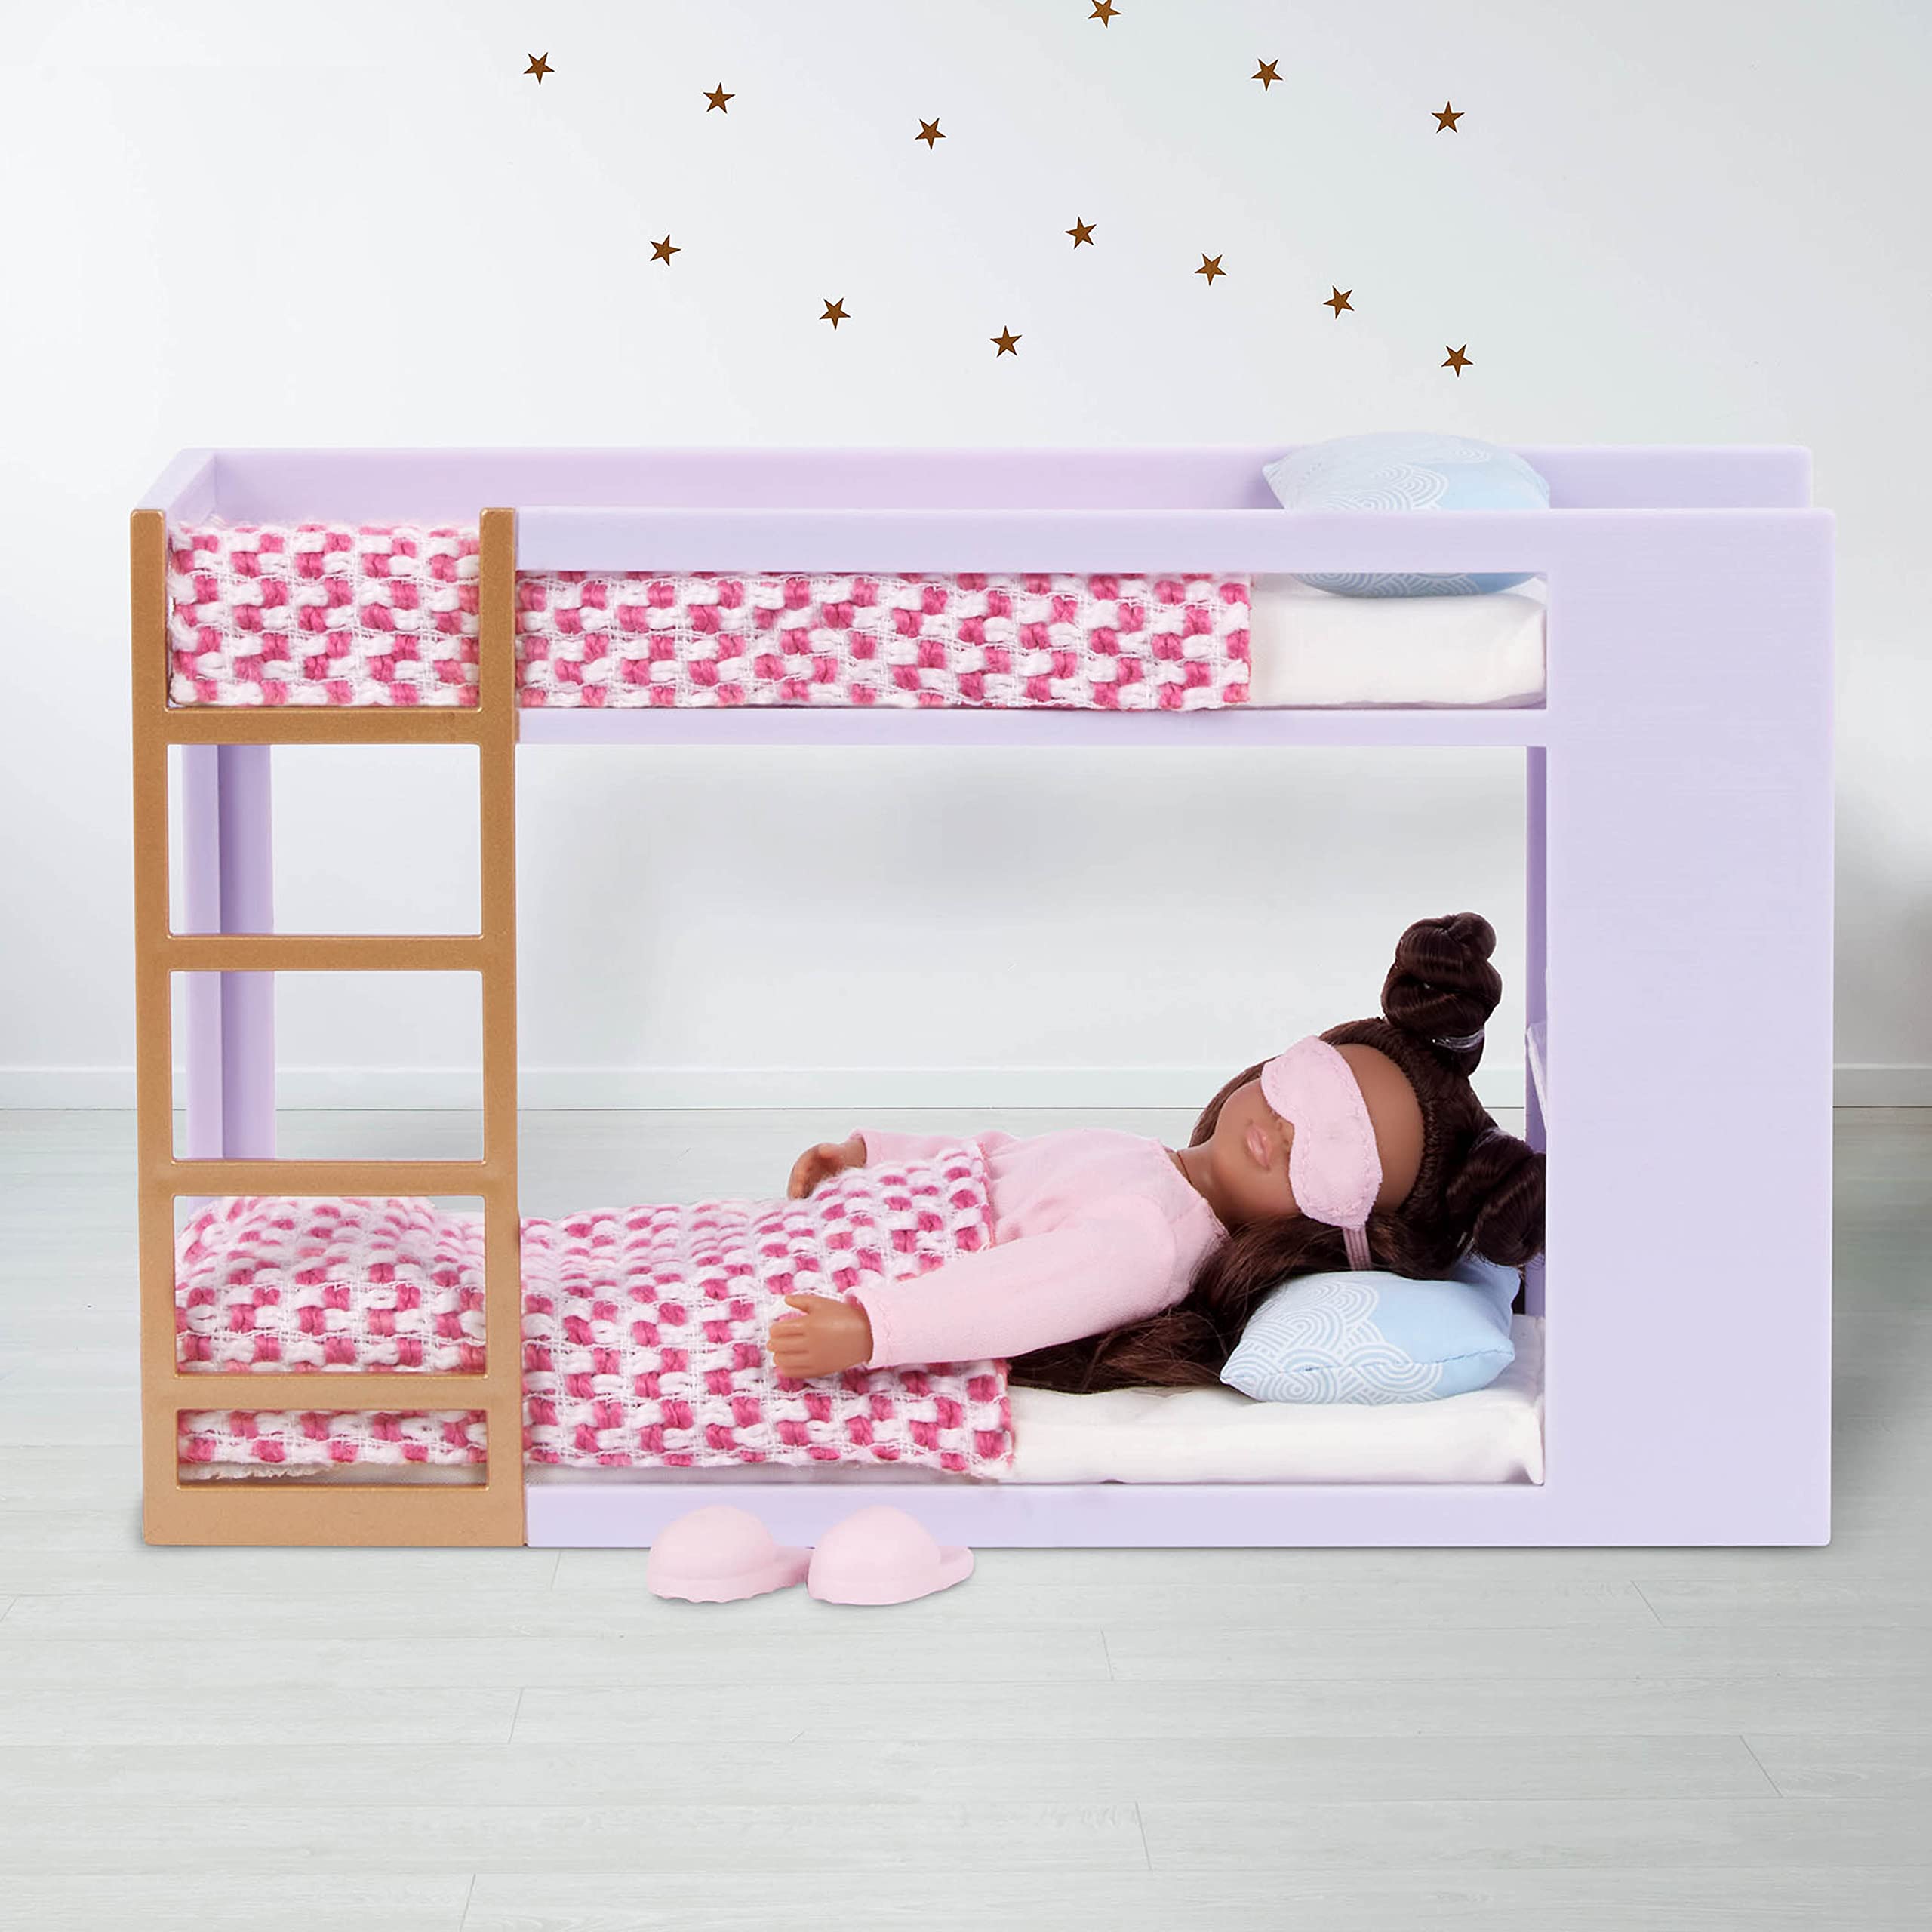 Lori Dolls – Tania’s Bunk Bed Set – Mini Doll & Toy Bunk Bed – 6-inch Doll & Bedroom Furniture – Dollhouse Accessories – Play Set for Kids – 3 Years +